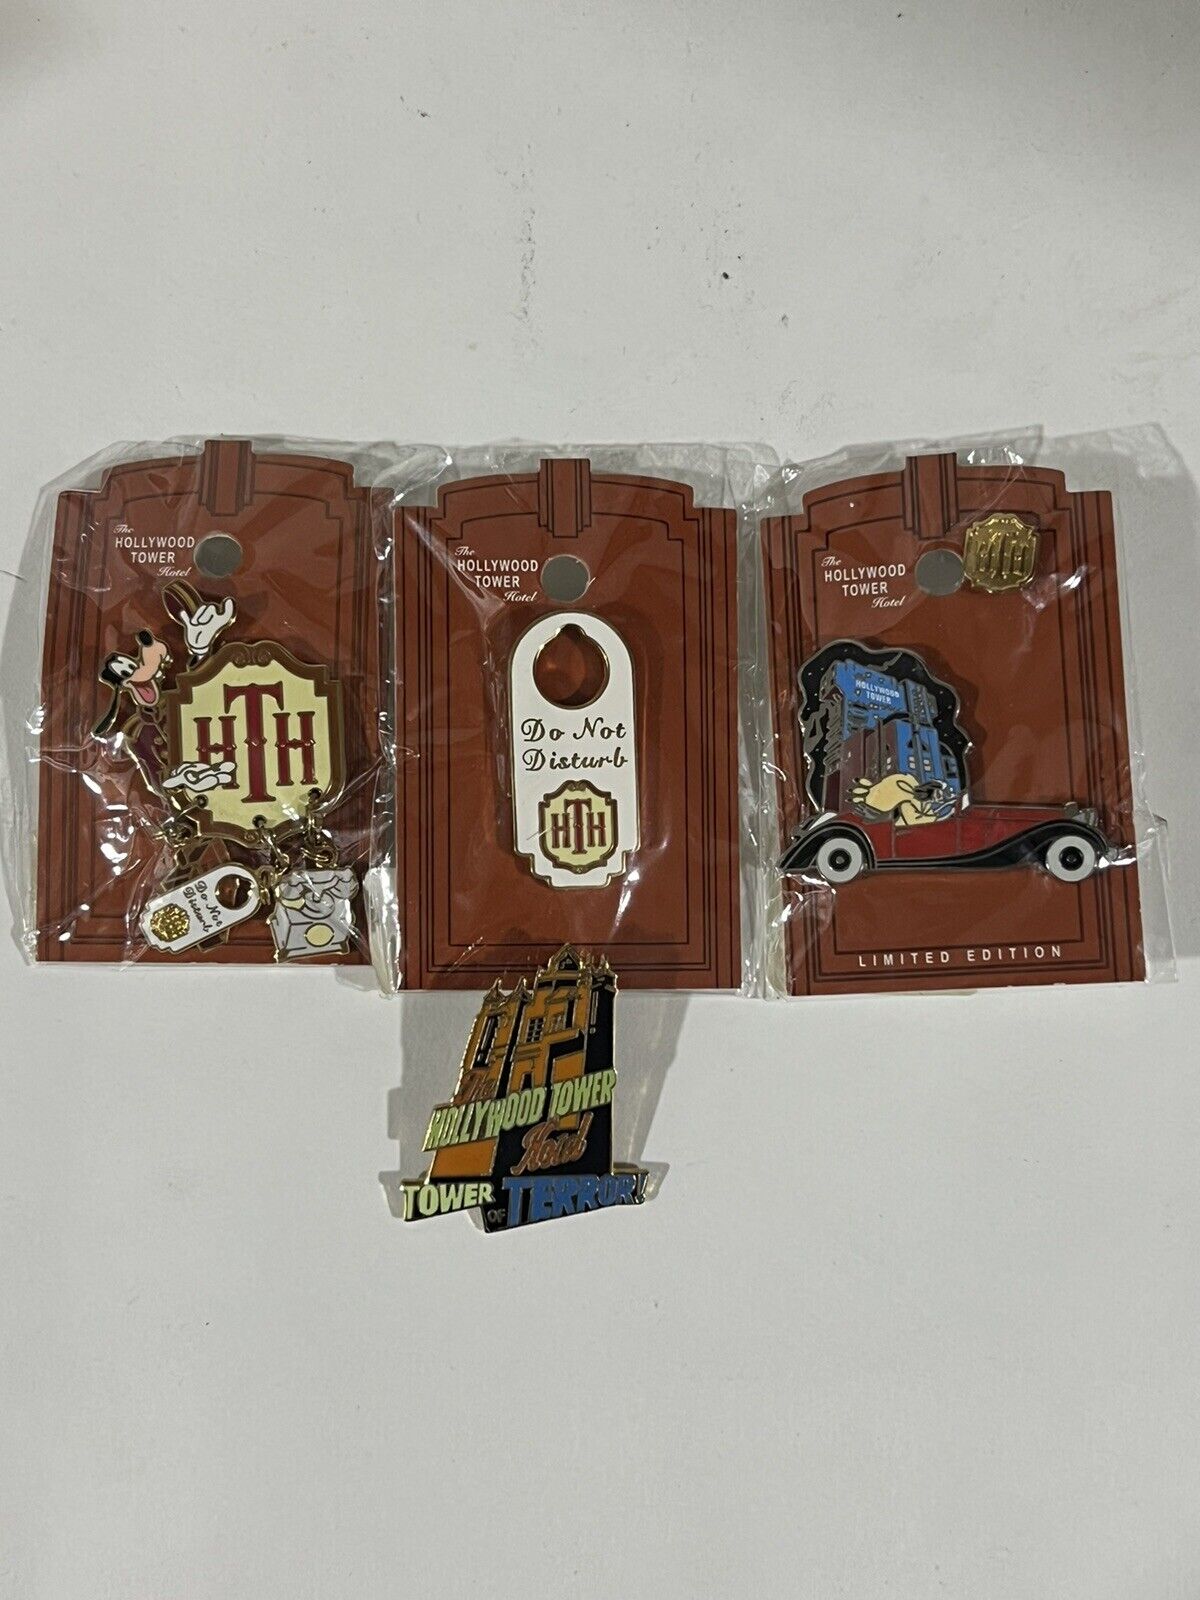 Rare 2004 Collectors Hollywood Tower of Terror Hotel Set Disney Pins Lot of 4